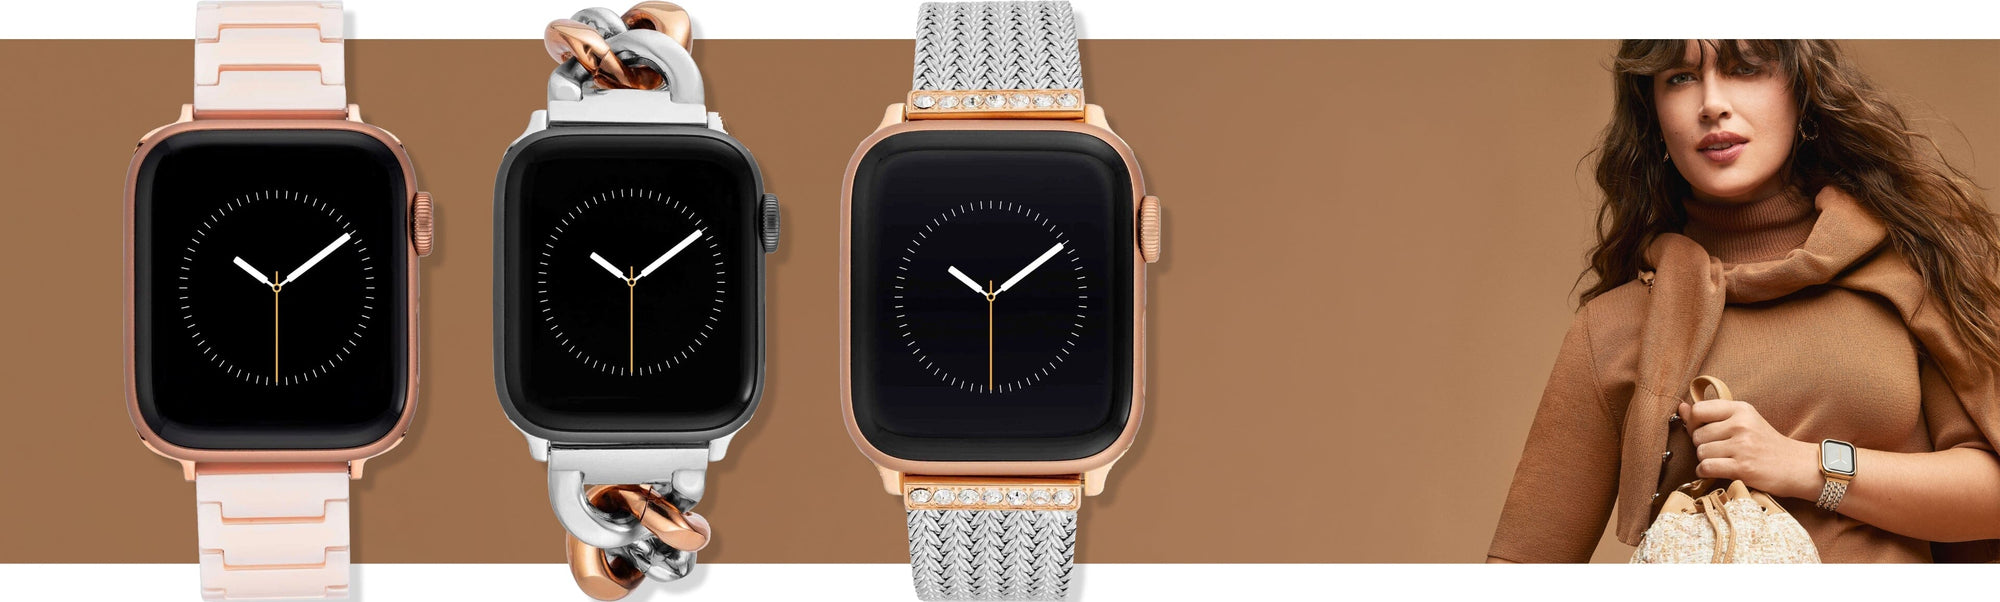 Apple Watch Styling: How to Make Your Apple Watch Look Classy